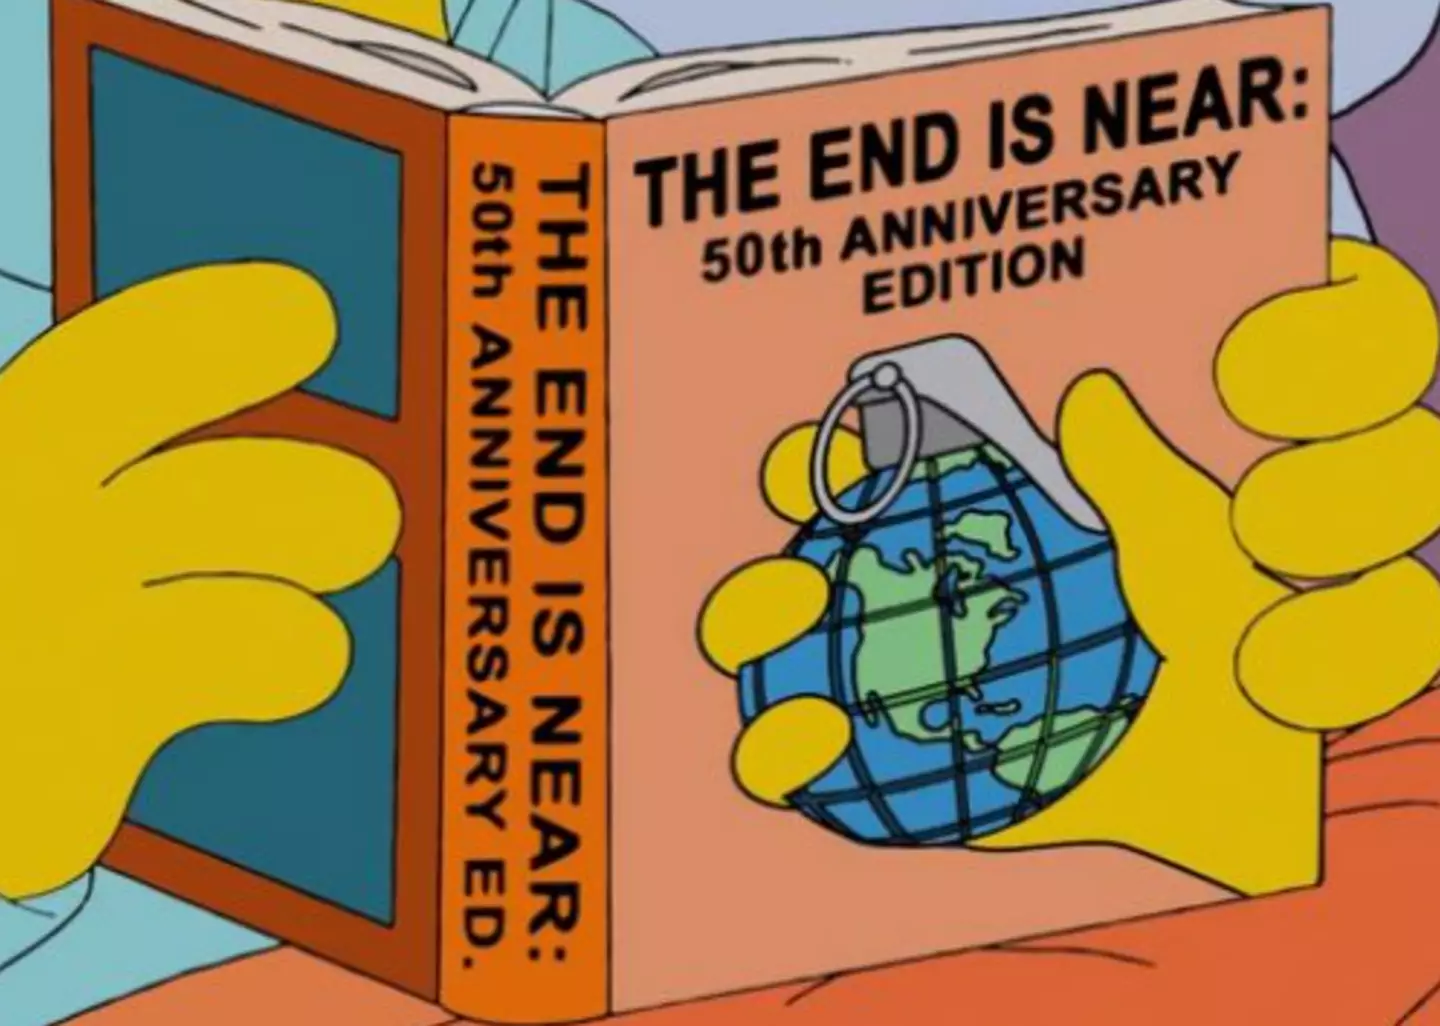 Do you think The Simpsons could predict the apocalypse?